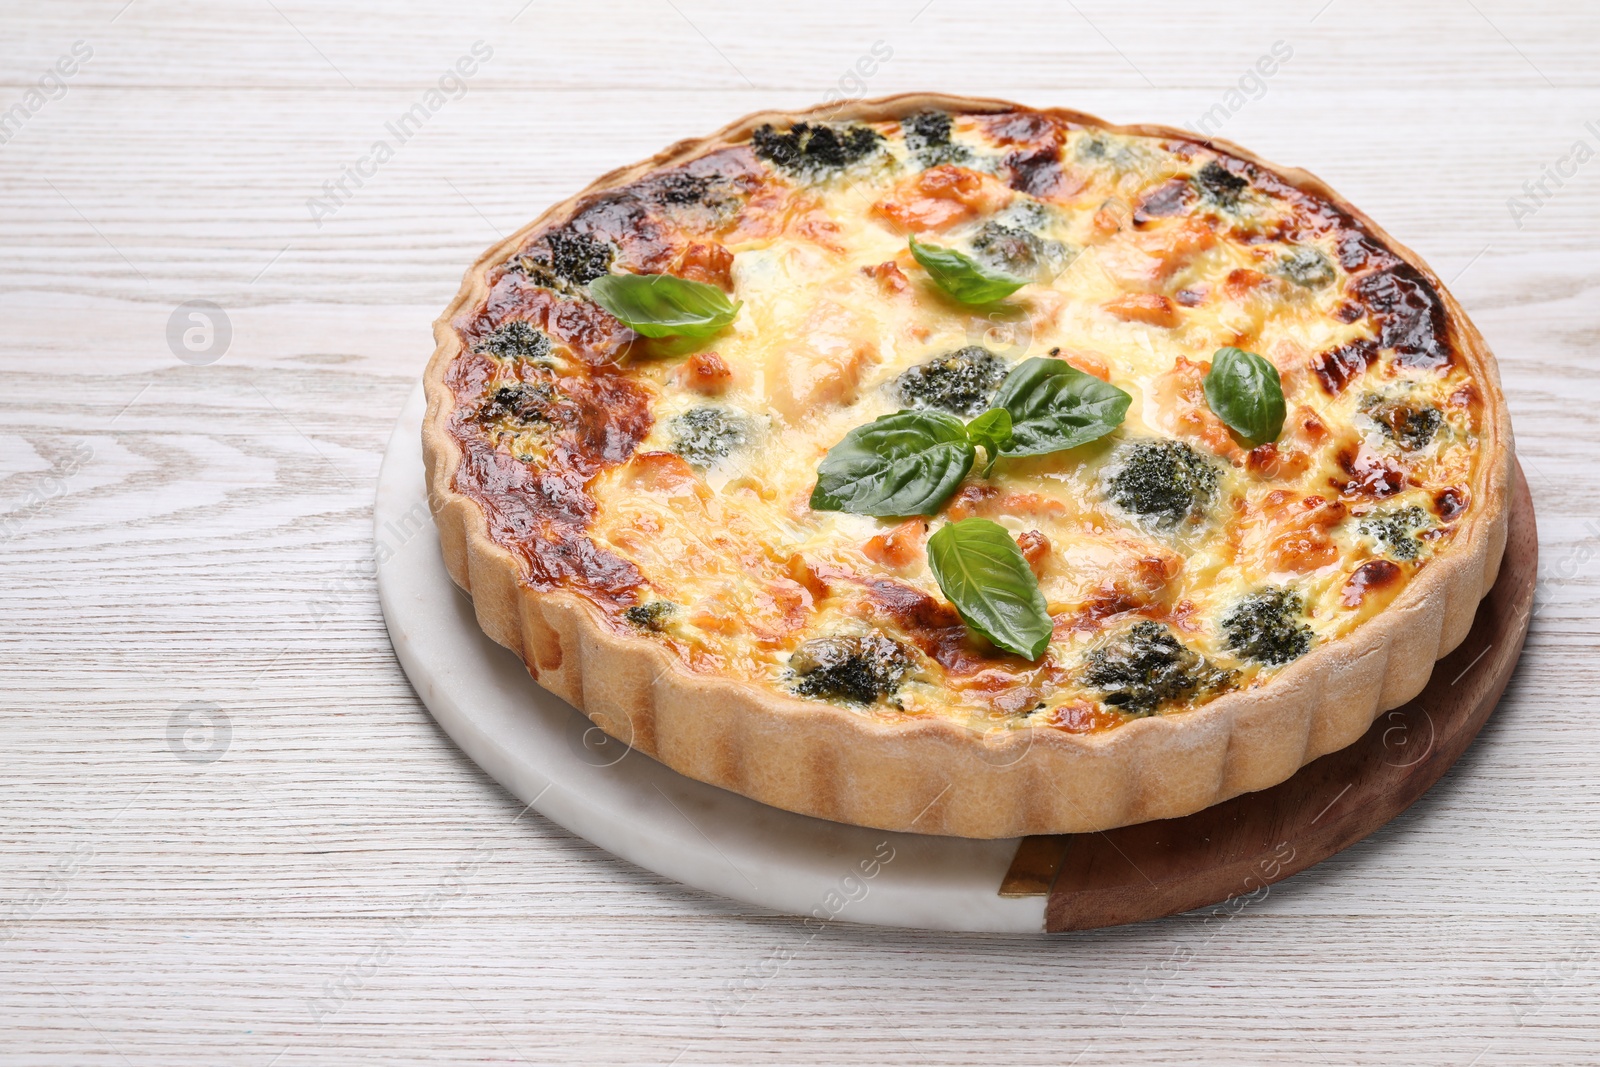 Photo of Delicious homemade quiche with salmon, broccoli and basil leaves on wooden table